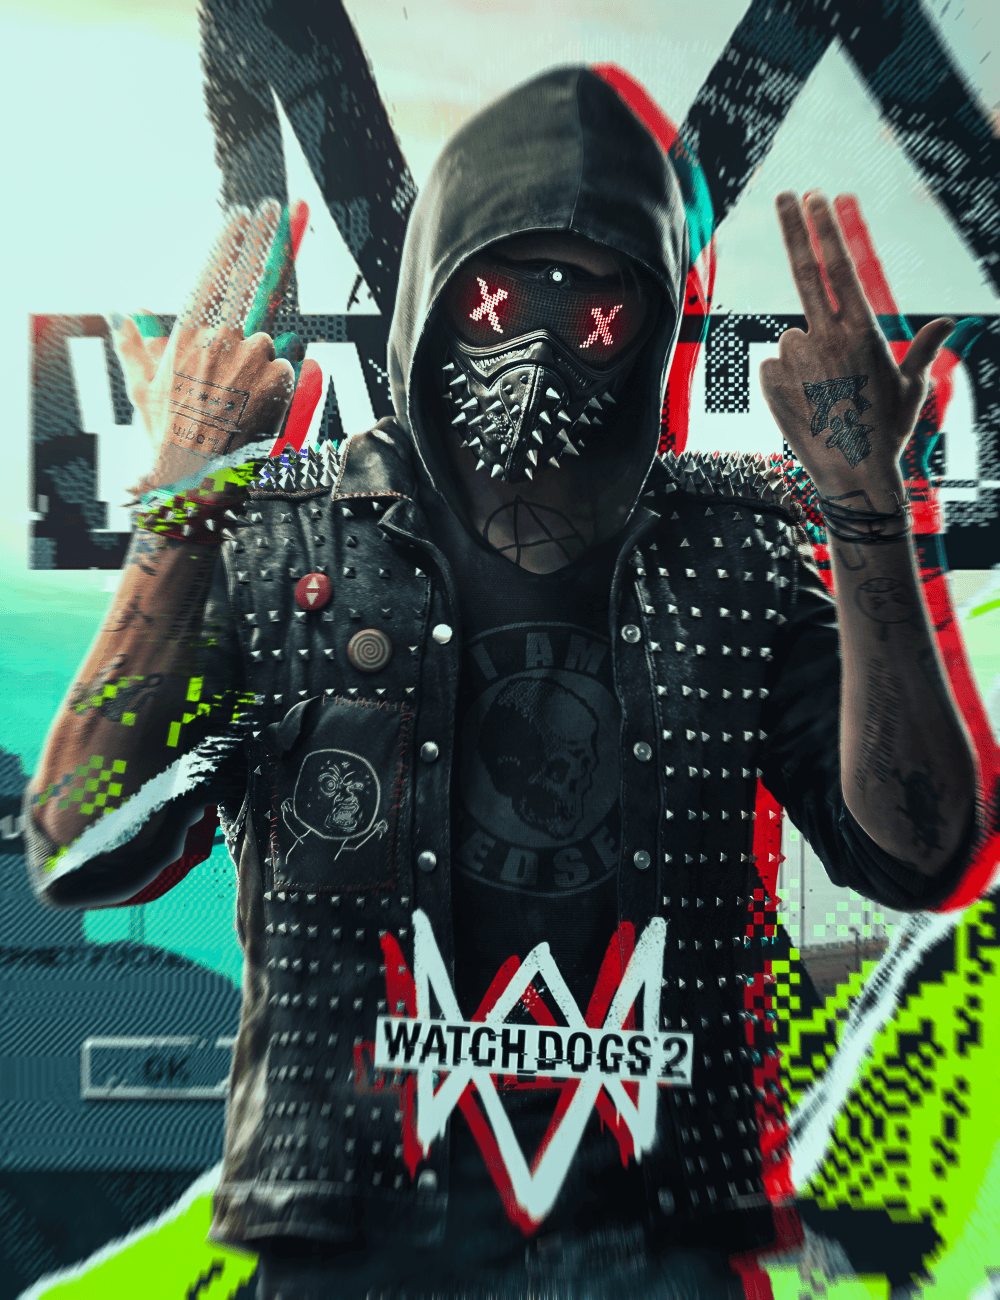 Wrench Watch Dogs Wallpapers Wallpaper Cave